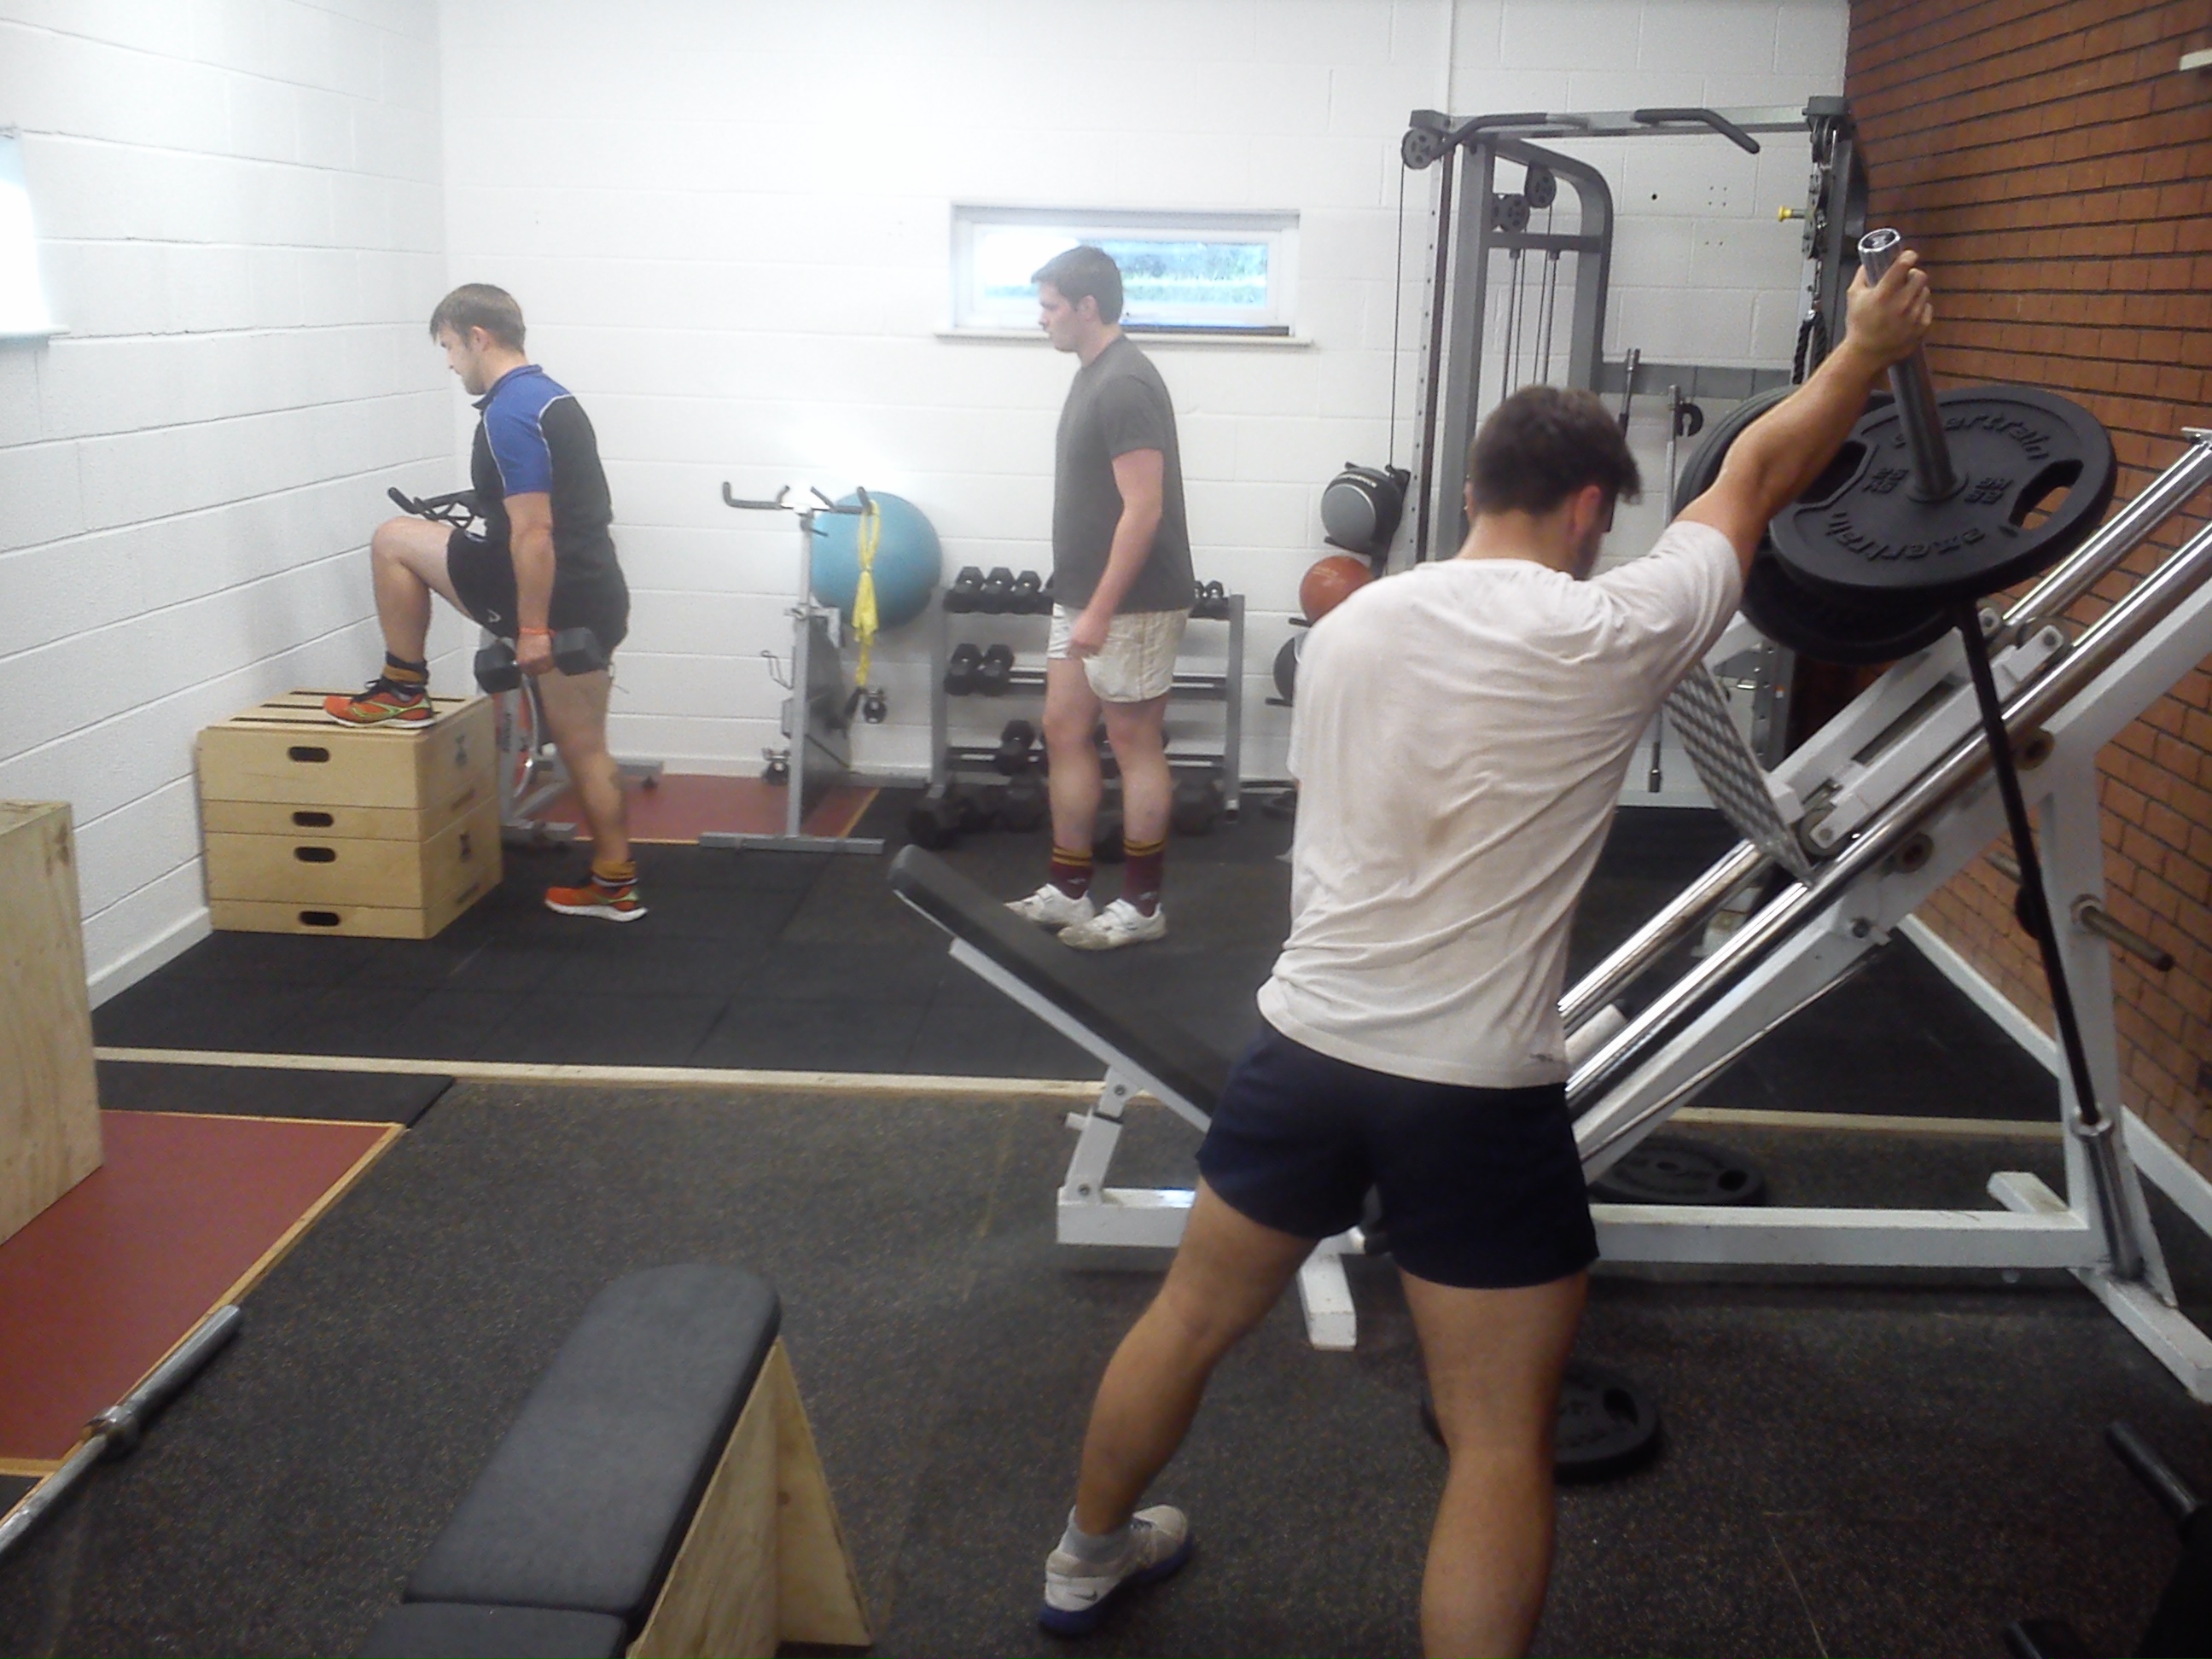 The lads try out the new gym